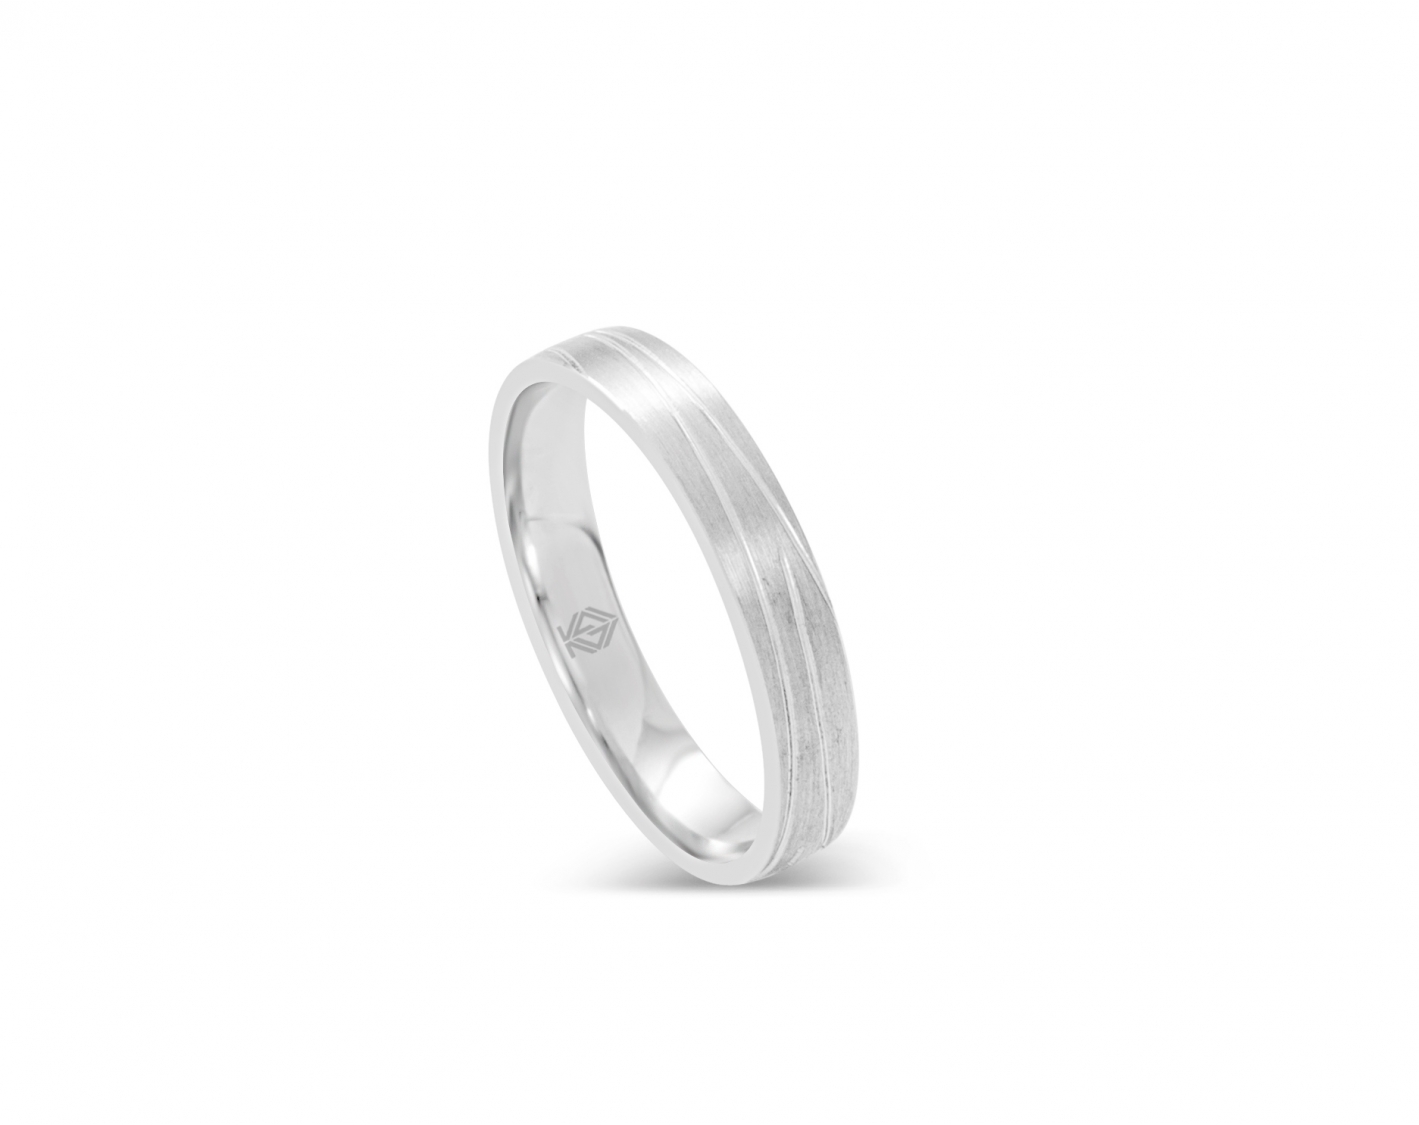 18k white gold 4mm matte wedding ring with non-parallel inlays Photos & images